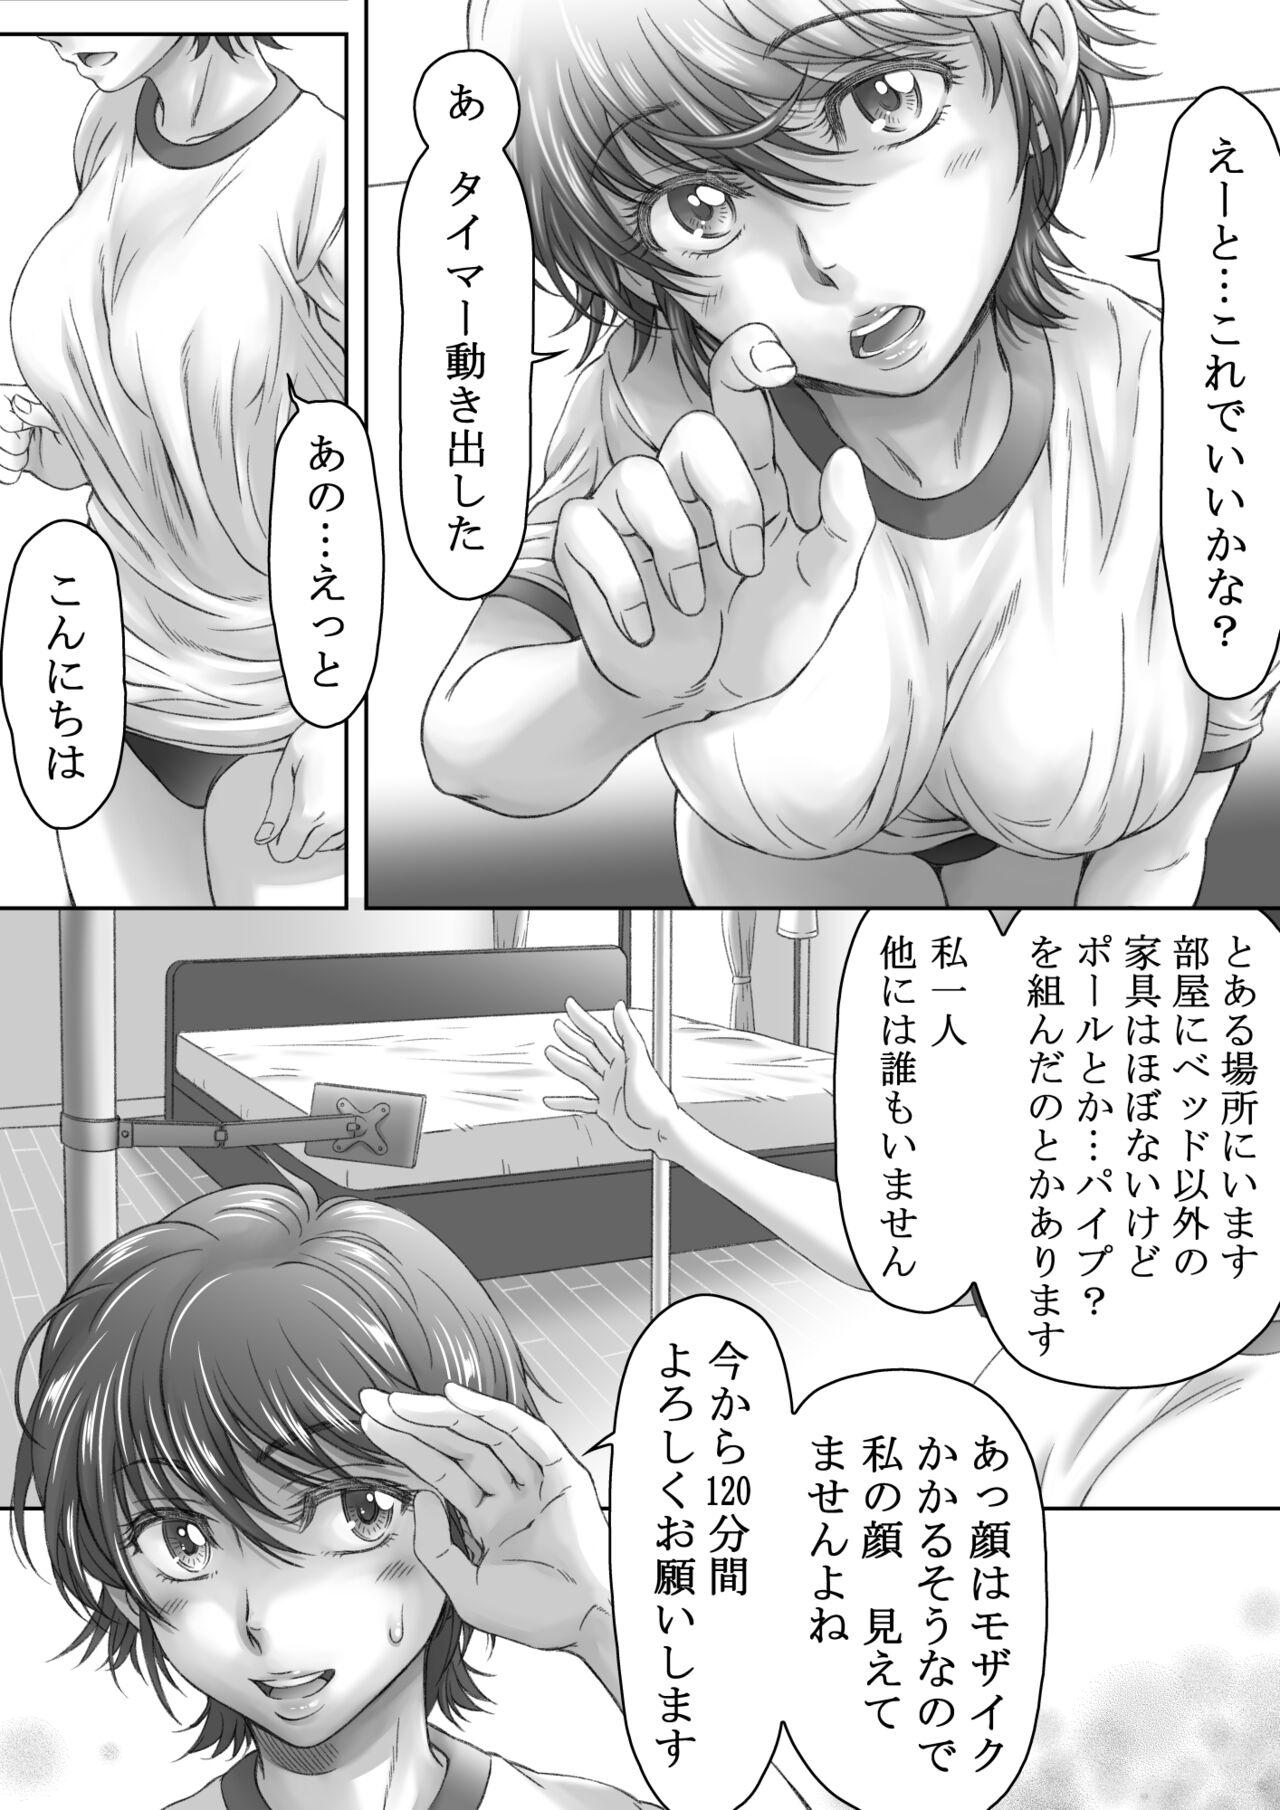 Housewife ブルマータイム120分 Foot Job - Page 3